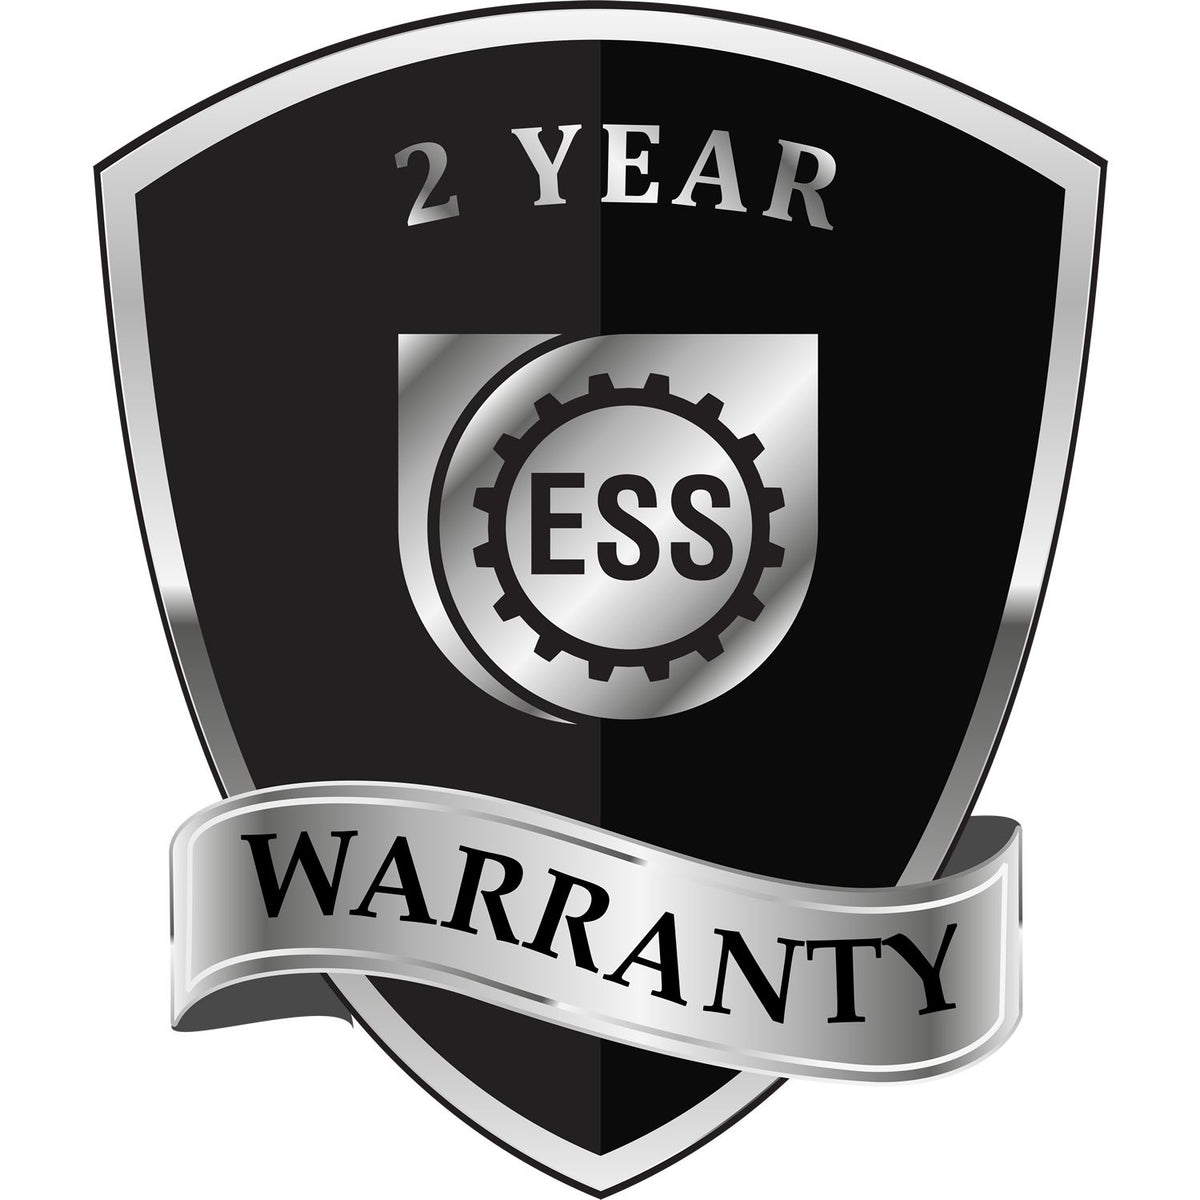 A black and silver badge or emblem showing warranty information for the Gift South Carolina Geologist Seal